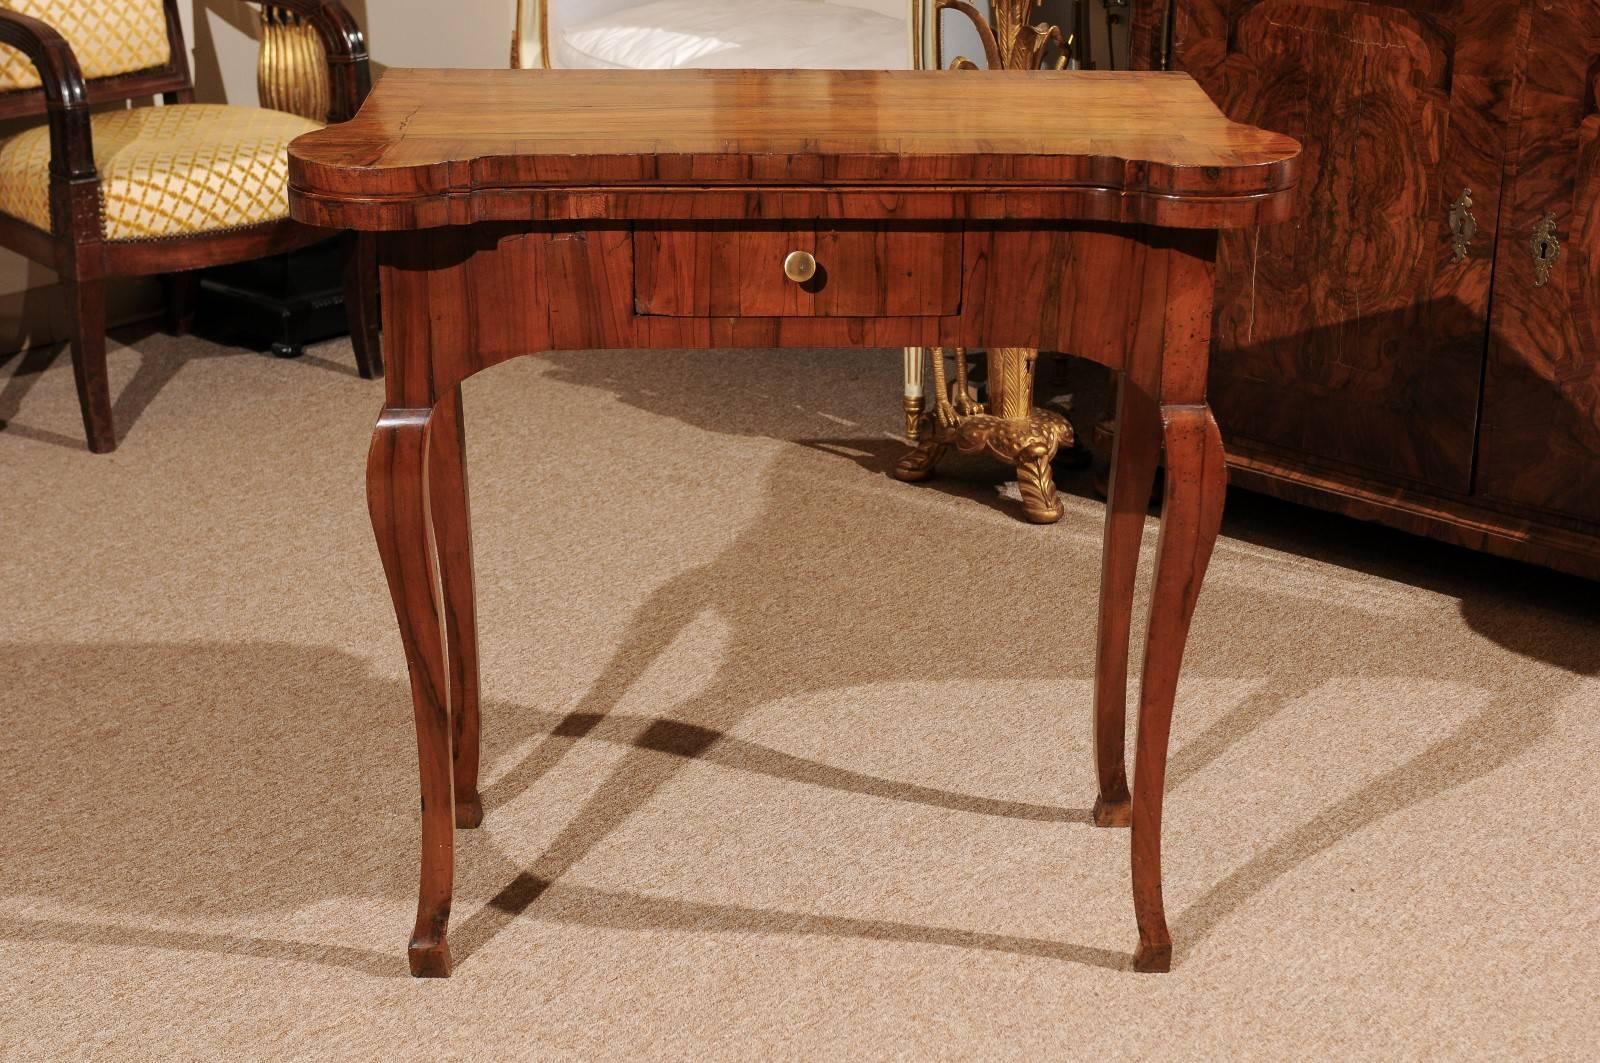 18th Century Olivewood Game Table with Drawer, Cabriole Legs and Hoof Feet 1